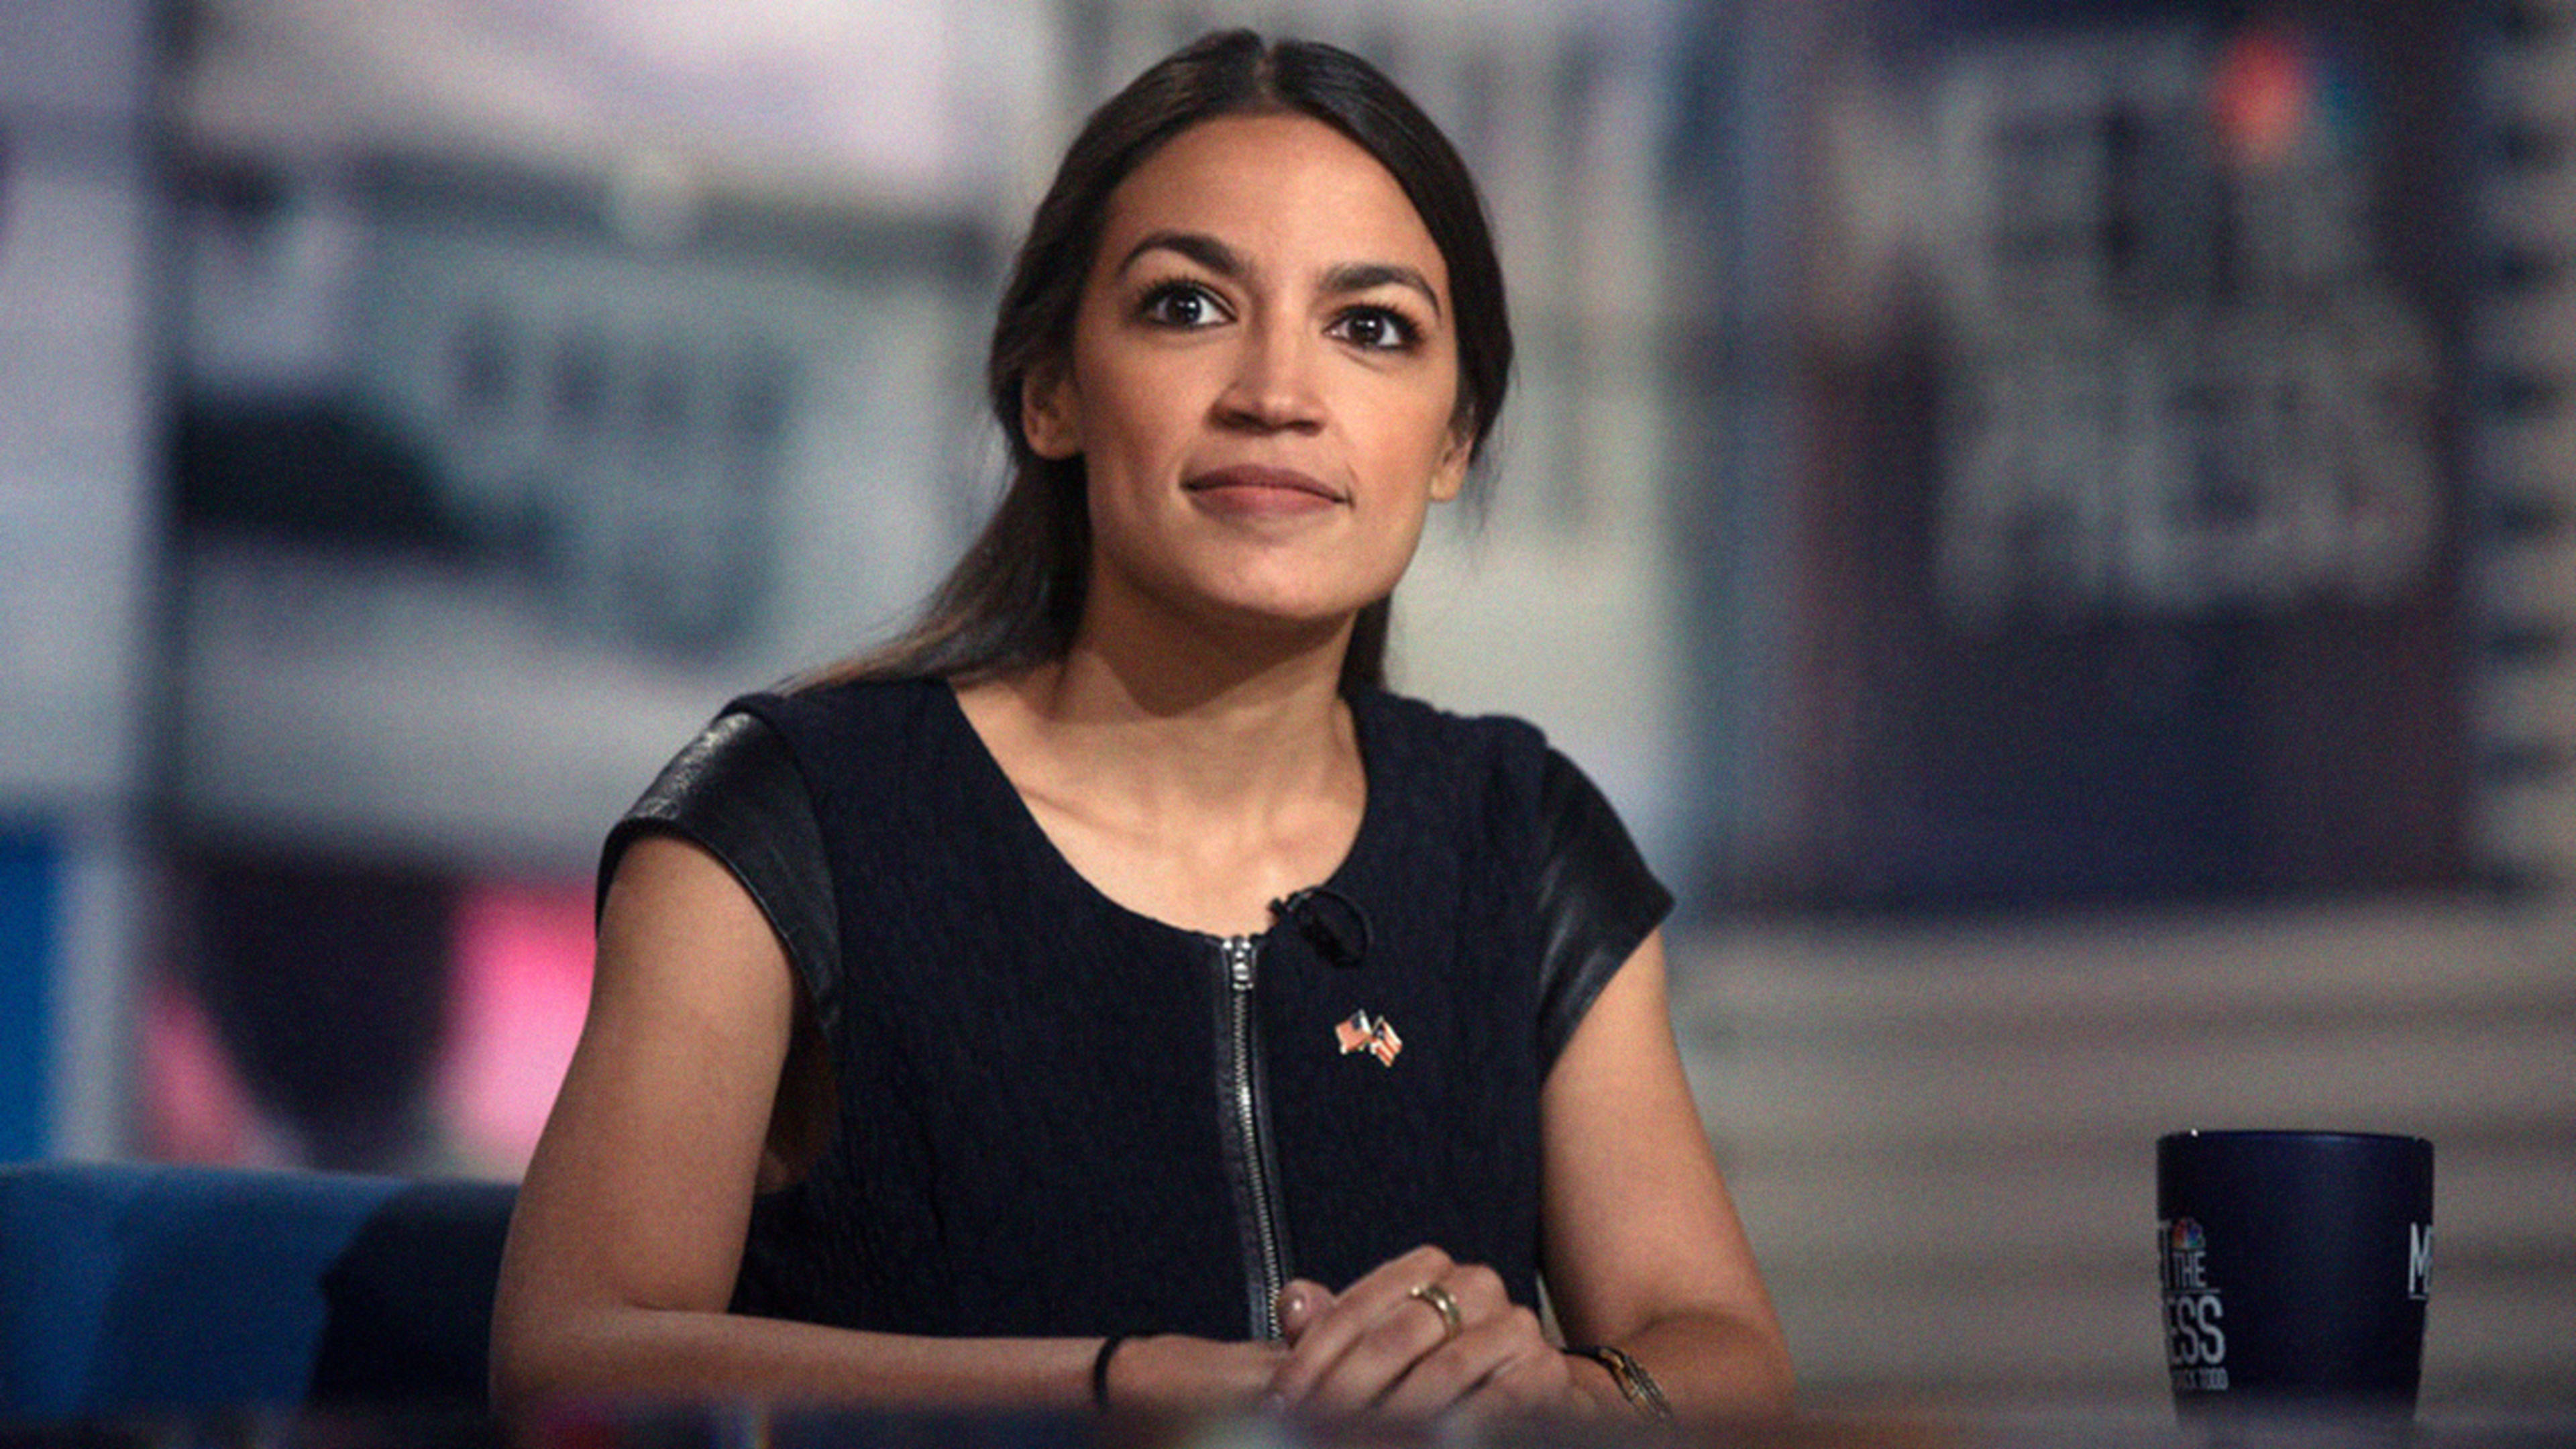 Here are the 4 most ridiculous “takedowns” of Alexandria Ocasio-Cortez